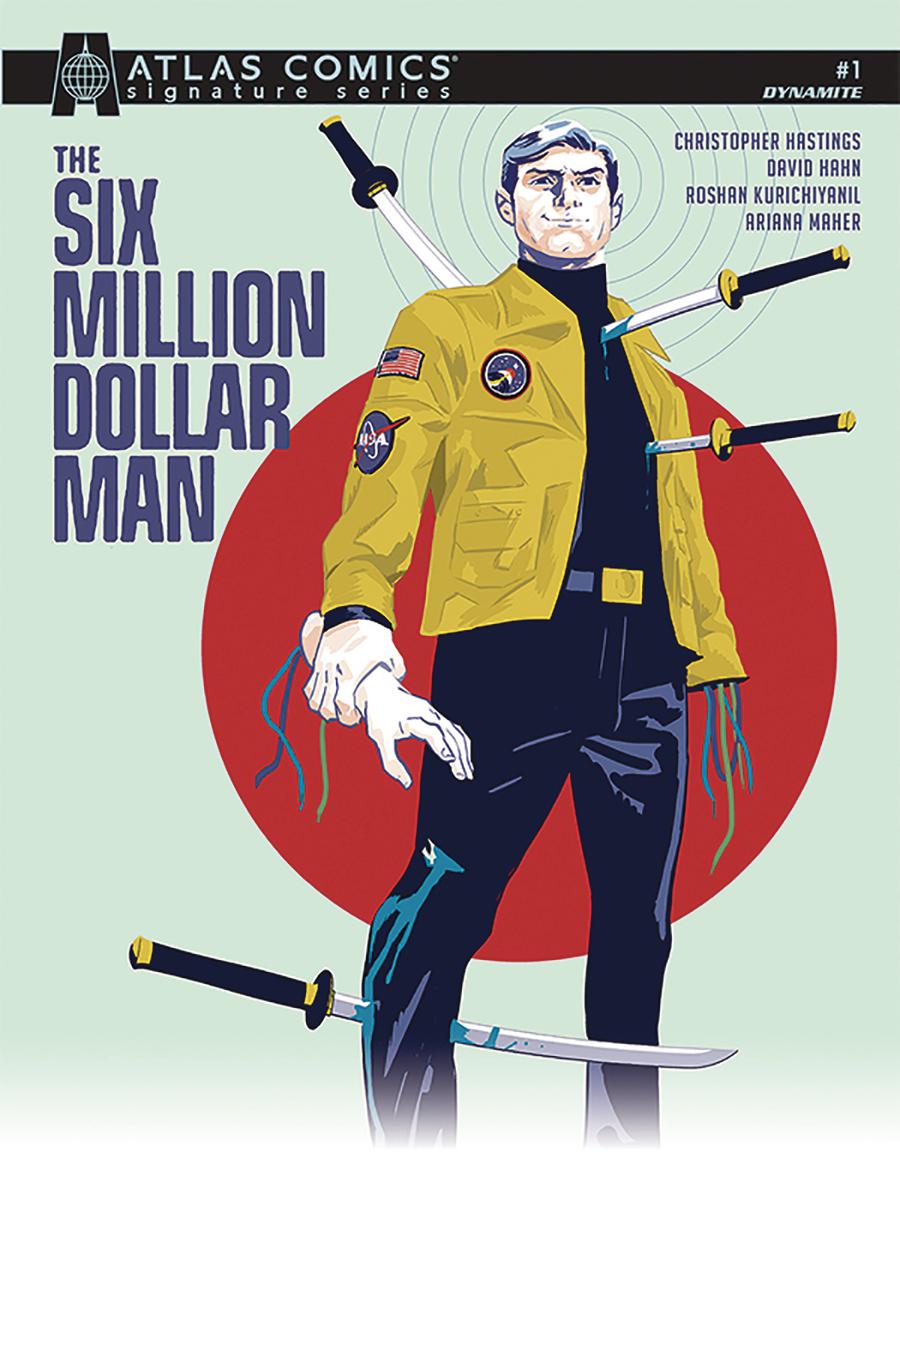 Six Million Dollar Man Vol 2 #1 Cover J Atlas Comics Signature Series Signed By Christopher Hastings